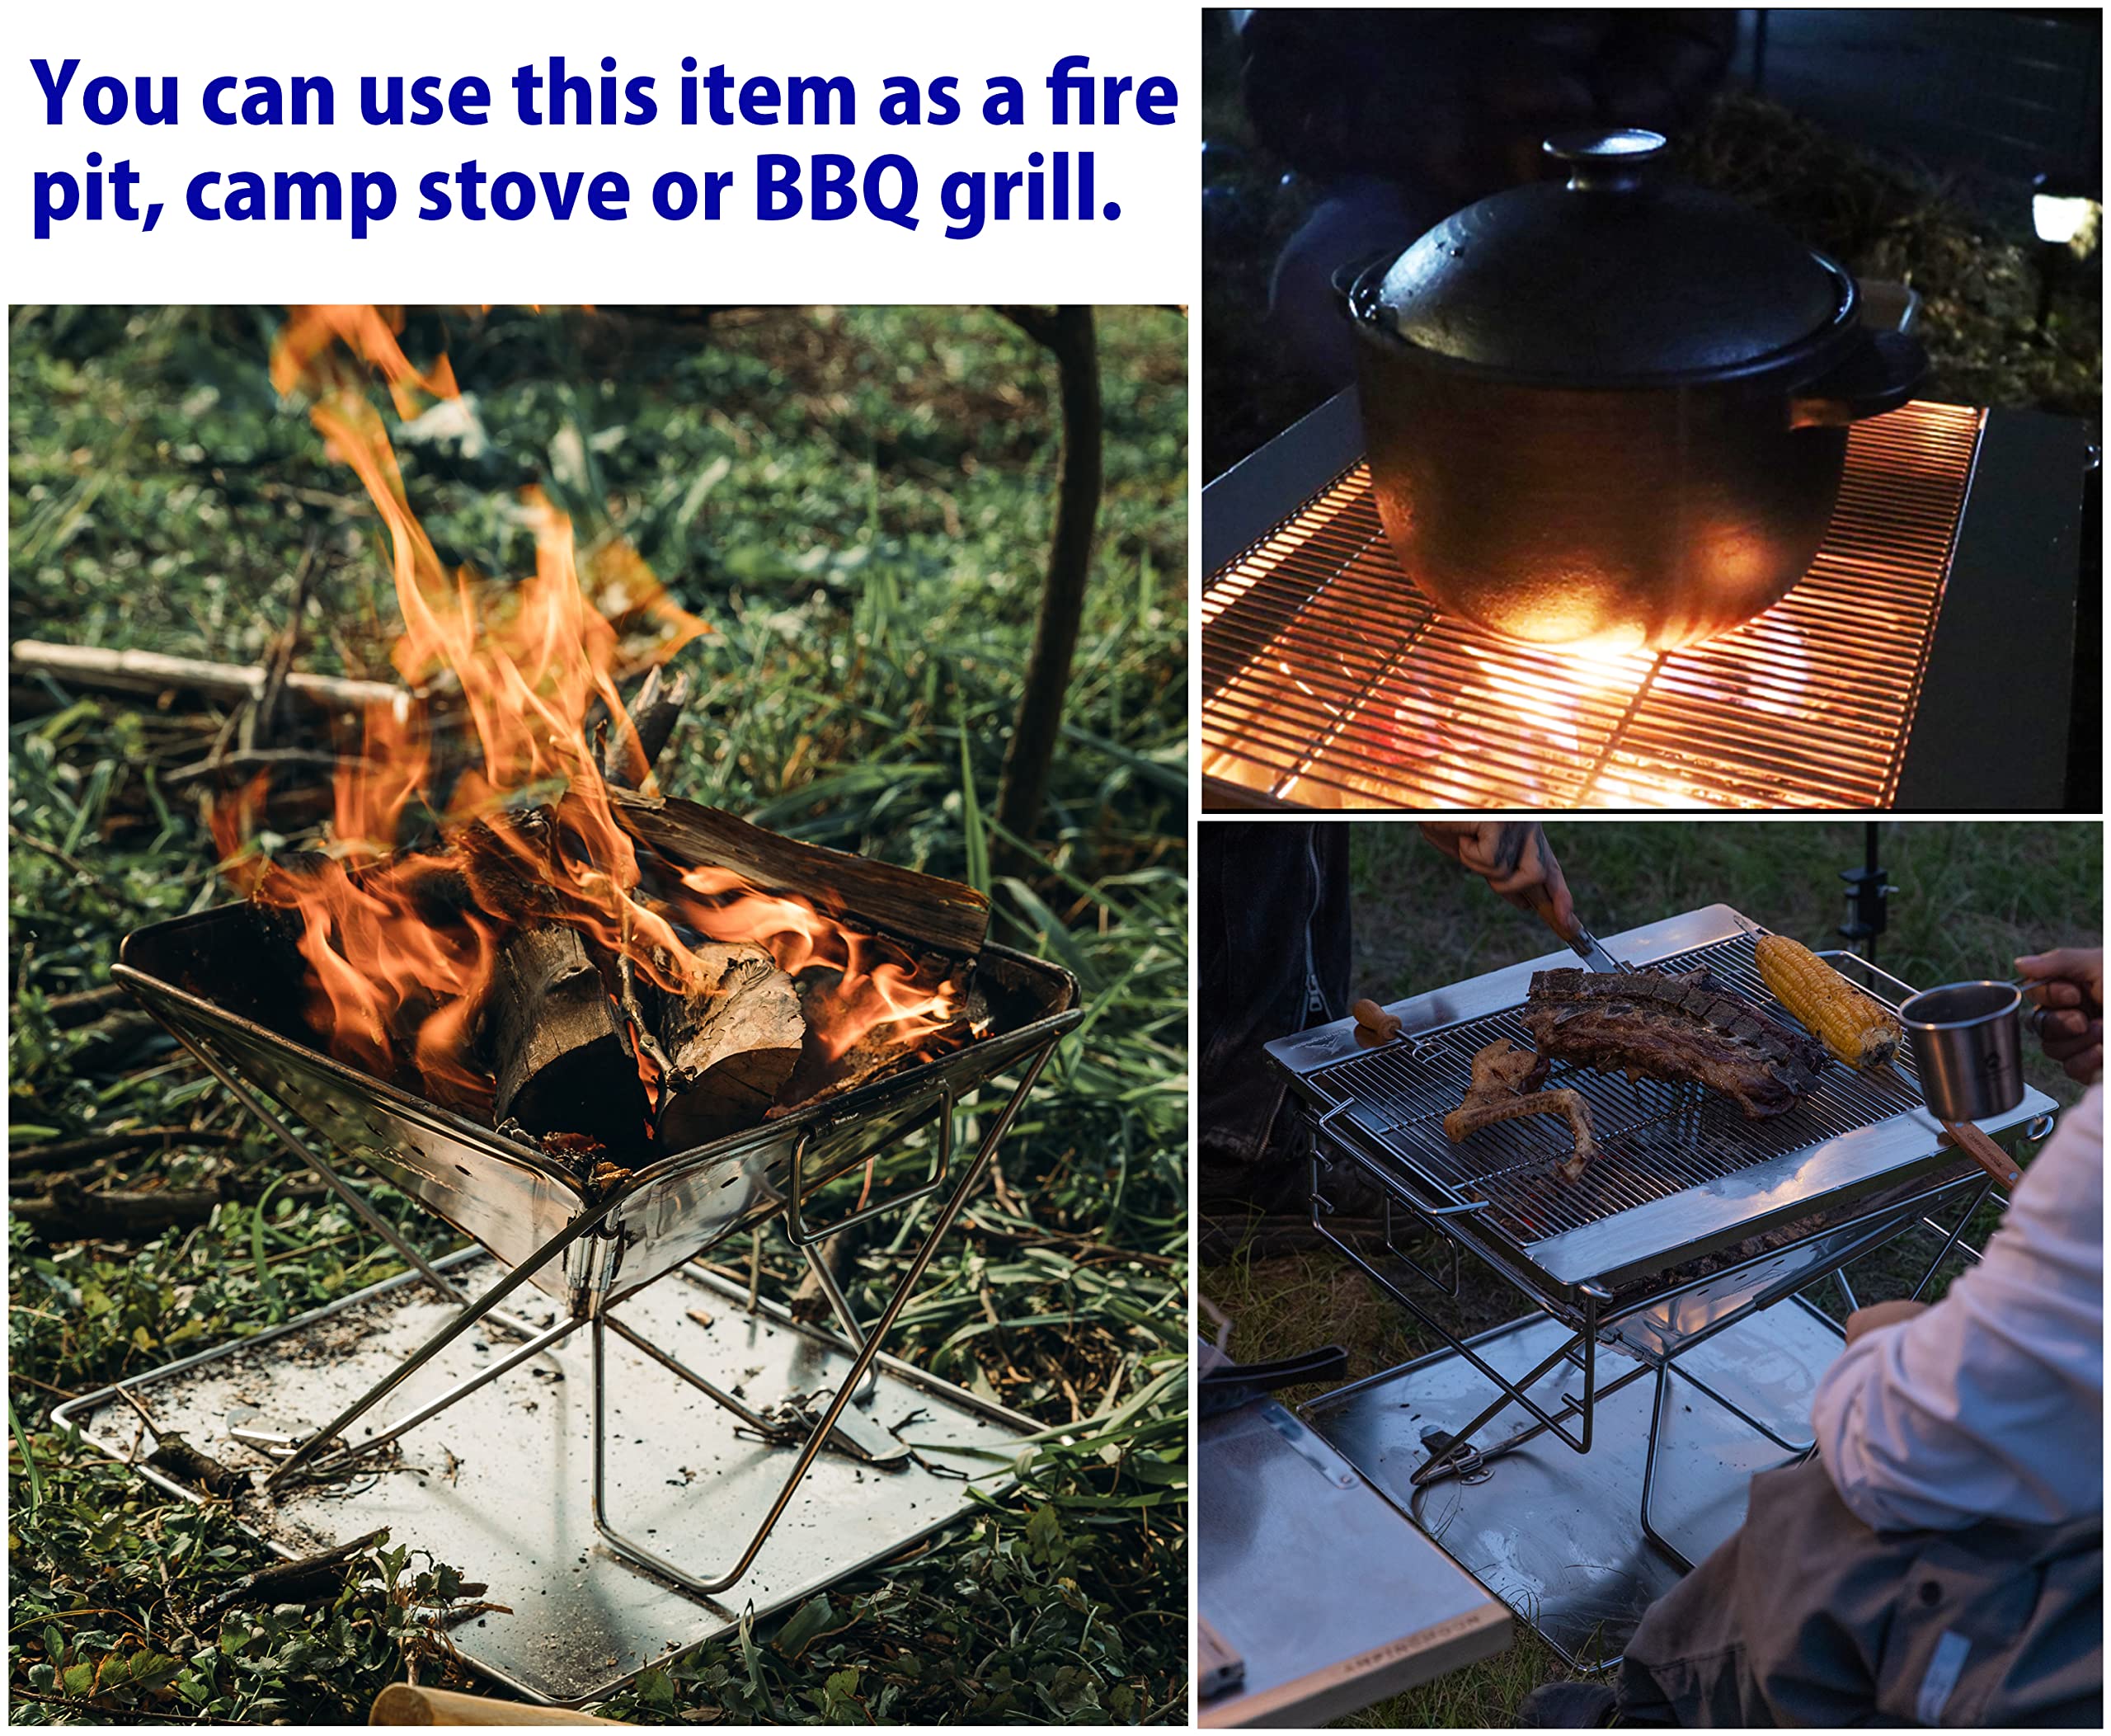 CAMPINGMOON 3-in-1 Portable Stainless Steel Wood Burning Grill and Fire Pit 16x18-inch with Carrying Bag MT-045